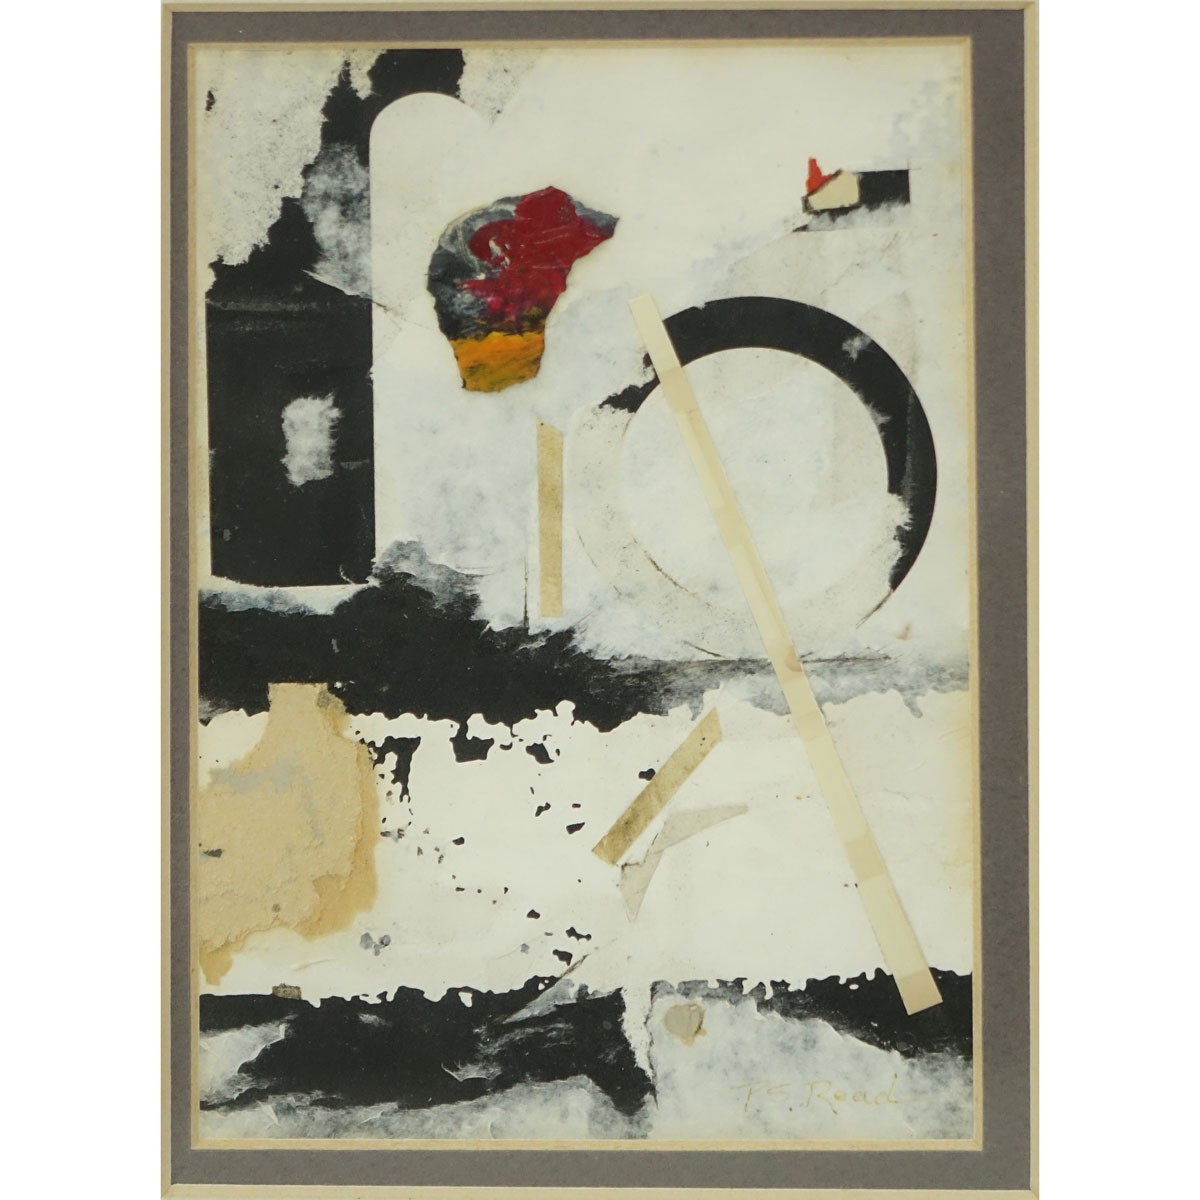 Two (2) Philip Standish Read, American (1927 - 2000) Mixed Media Collages, Abstract Compositions, Each Signed Lower Right, one is inscribed and dated 1993 en verso. Each in good condition.